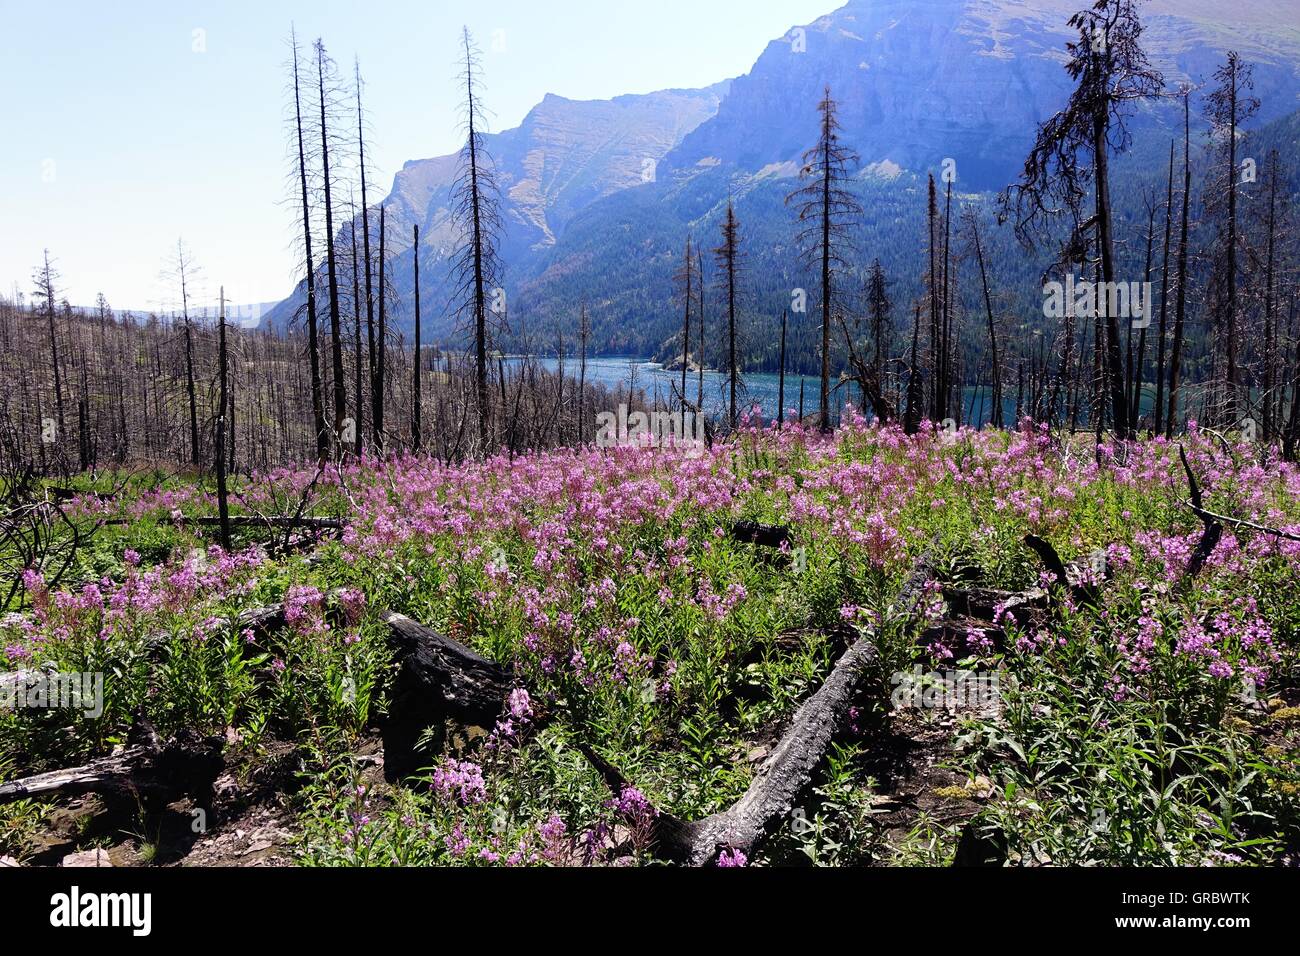 Burnt trees and fireweed, near the St. Mary River, Glacier National Park, Montana Stock Photo